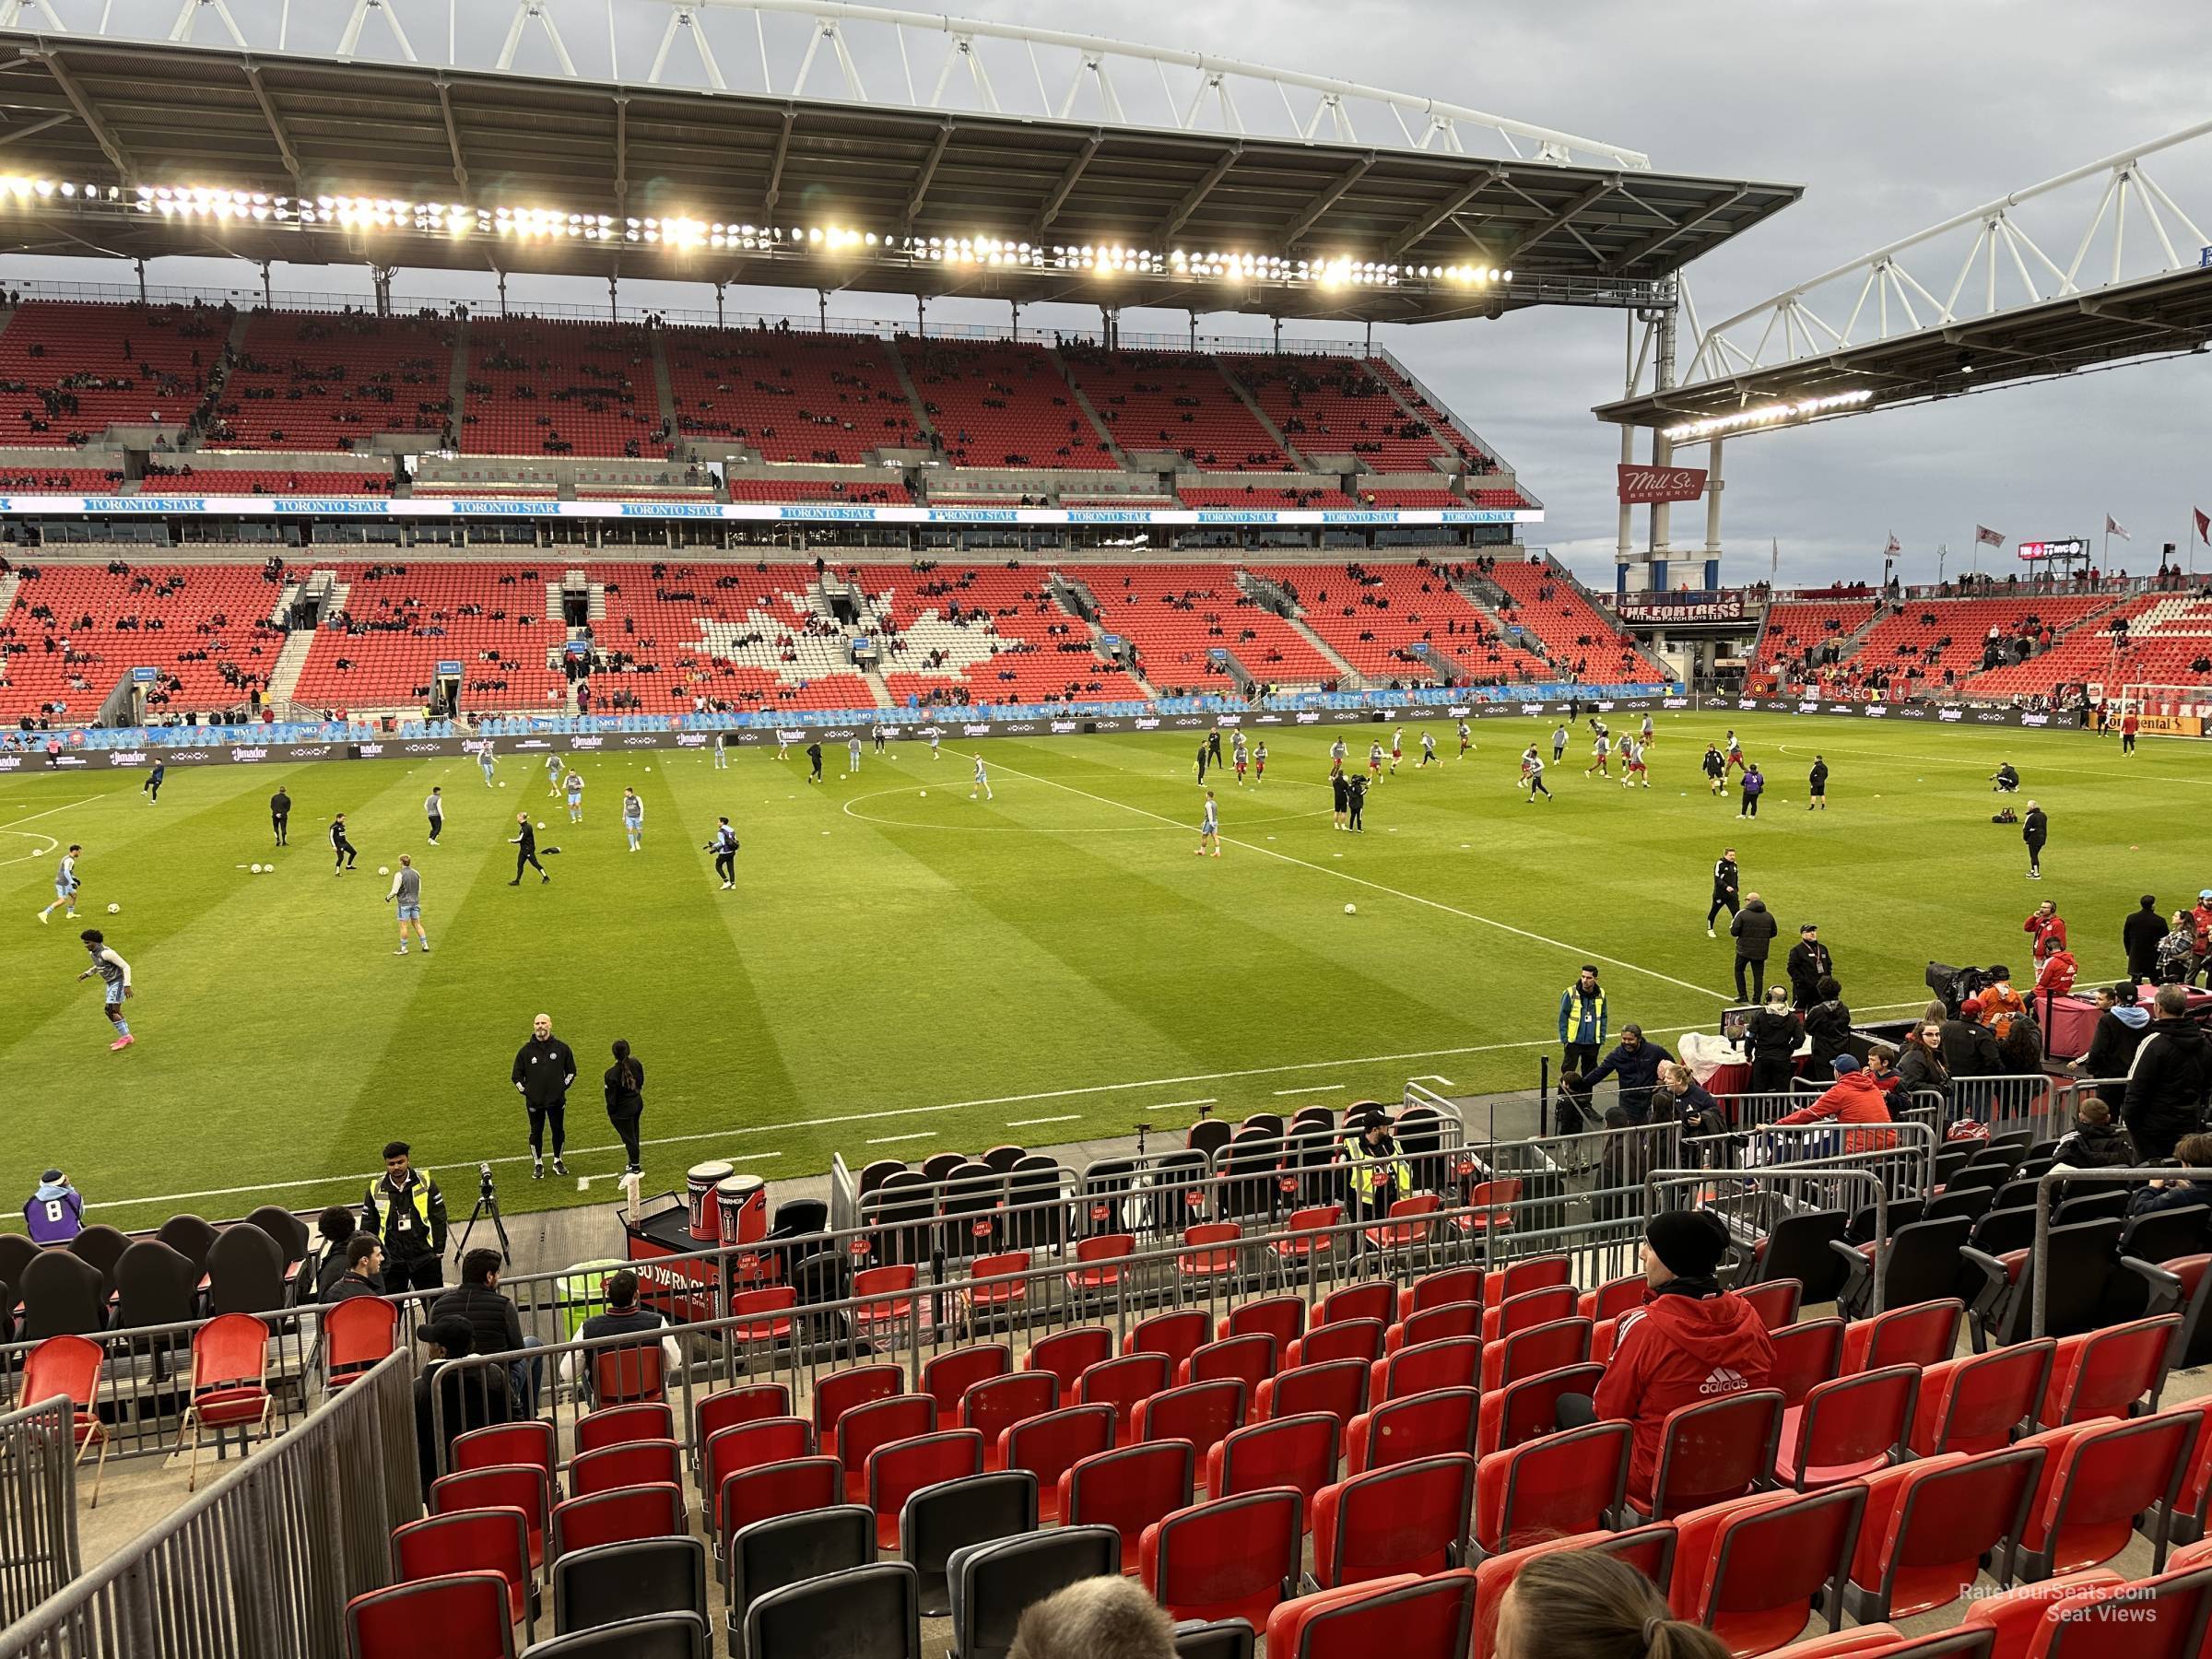 section 124, row 15 seat view  - bmo field